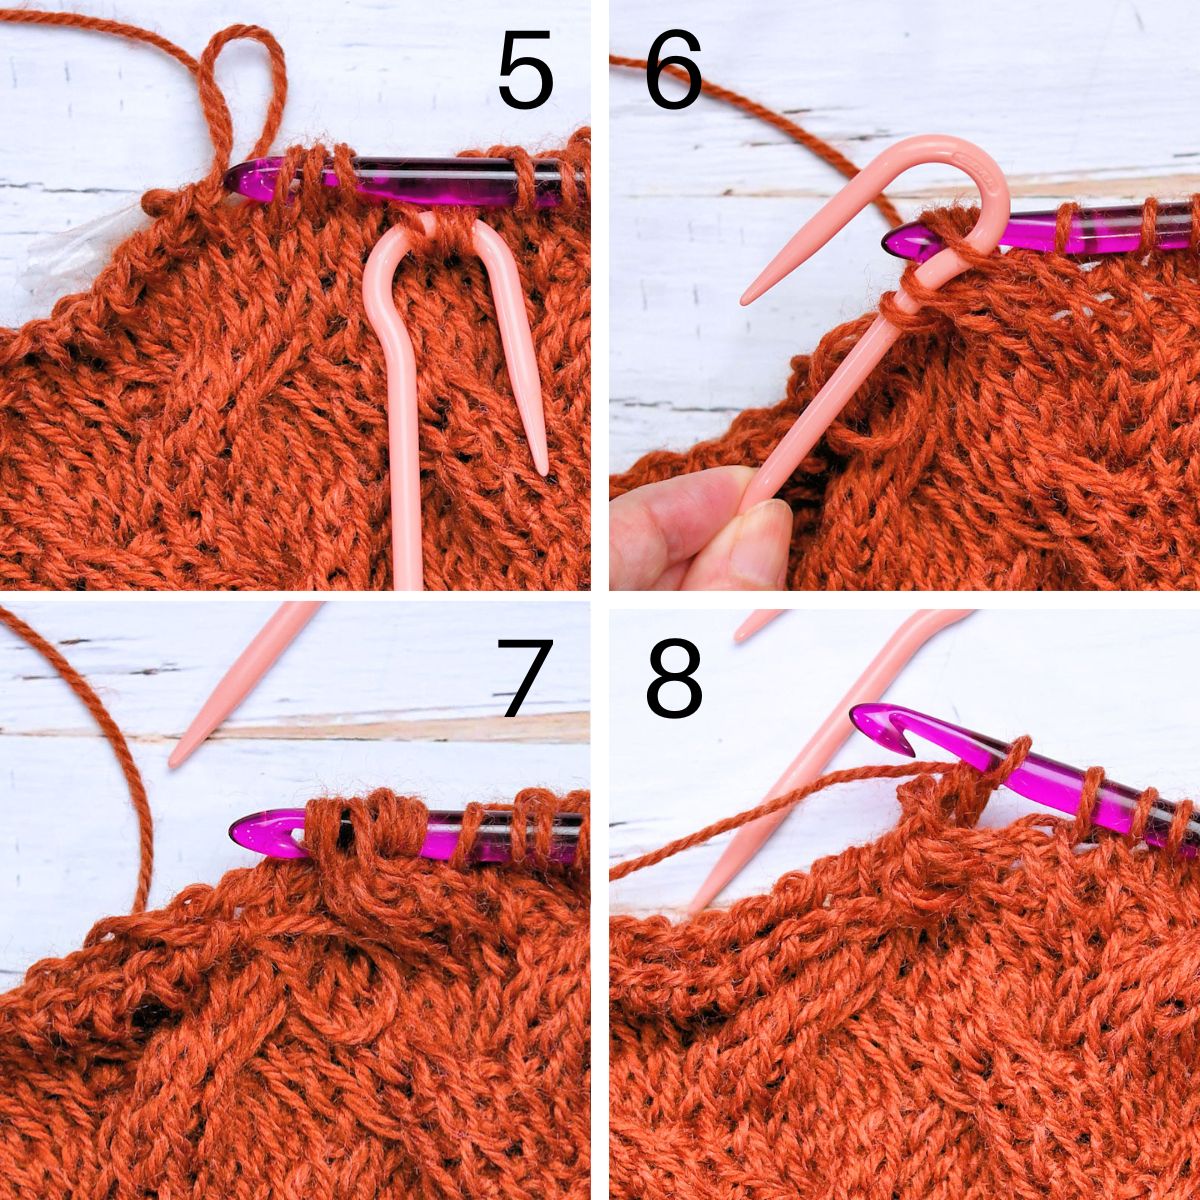 5-8 step collage for Left Leaning Tunisian crochet cable